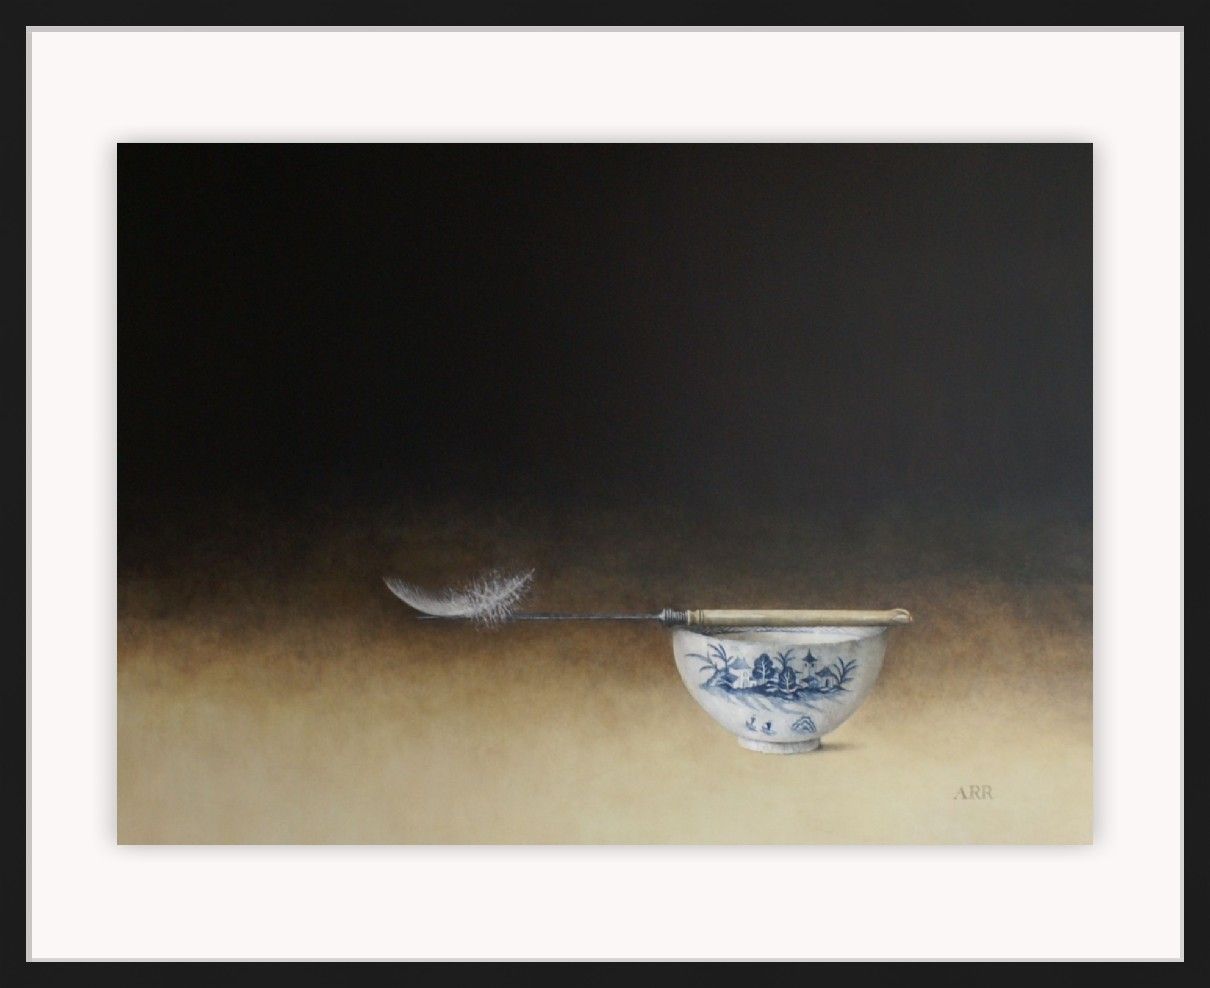 Chinese Bowl with Knife and Balancing Feather by Alison Rankin